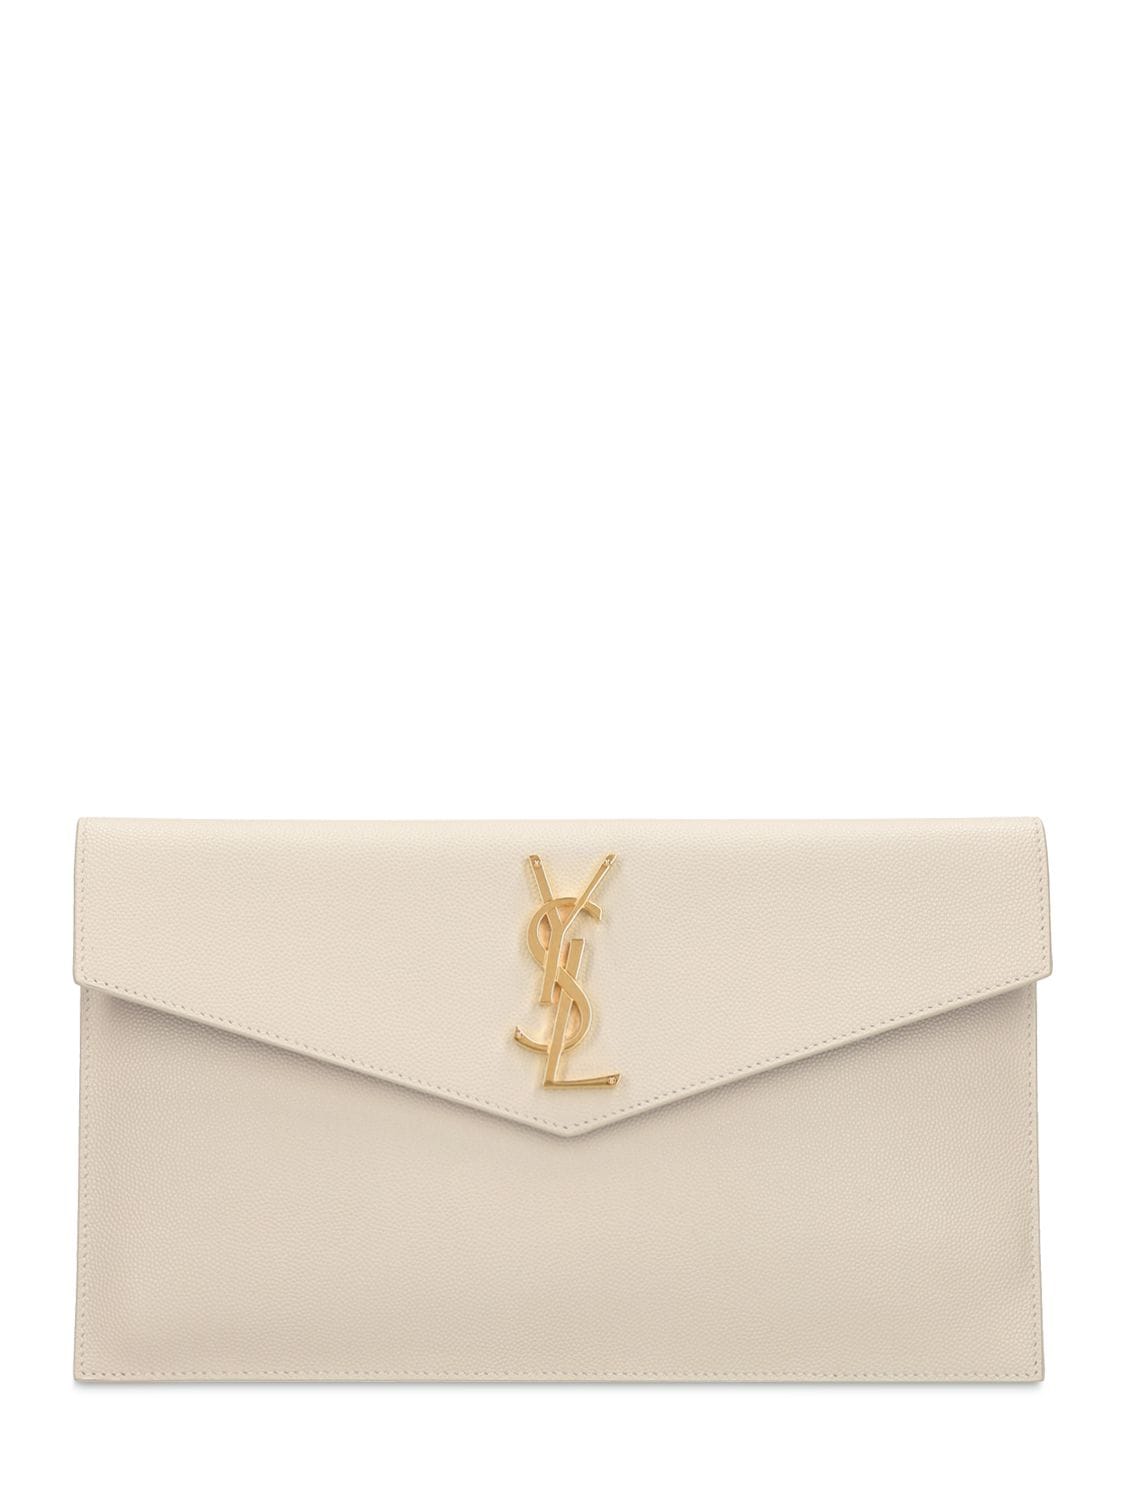 Uptown Leather Envelope Clutch